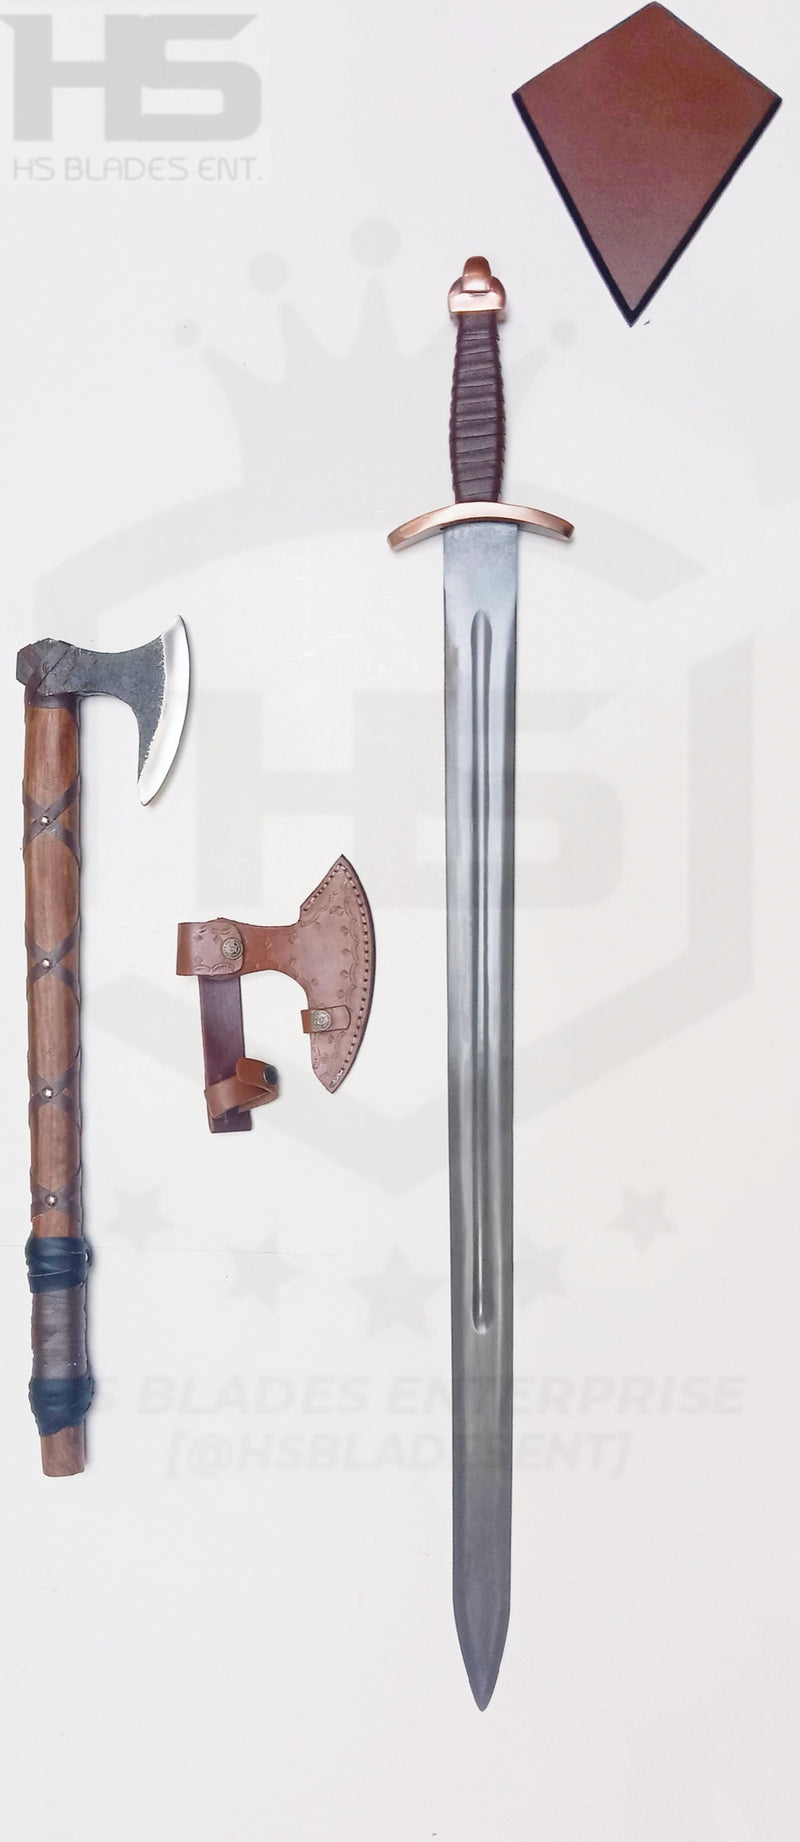 The Vikings Set of Ragnar Axe & Lagertha Sword for just $160 (Available in Standard & Battle Ready Versions)